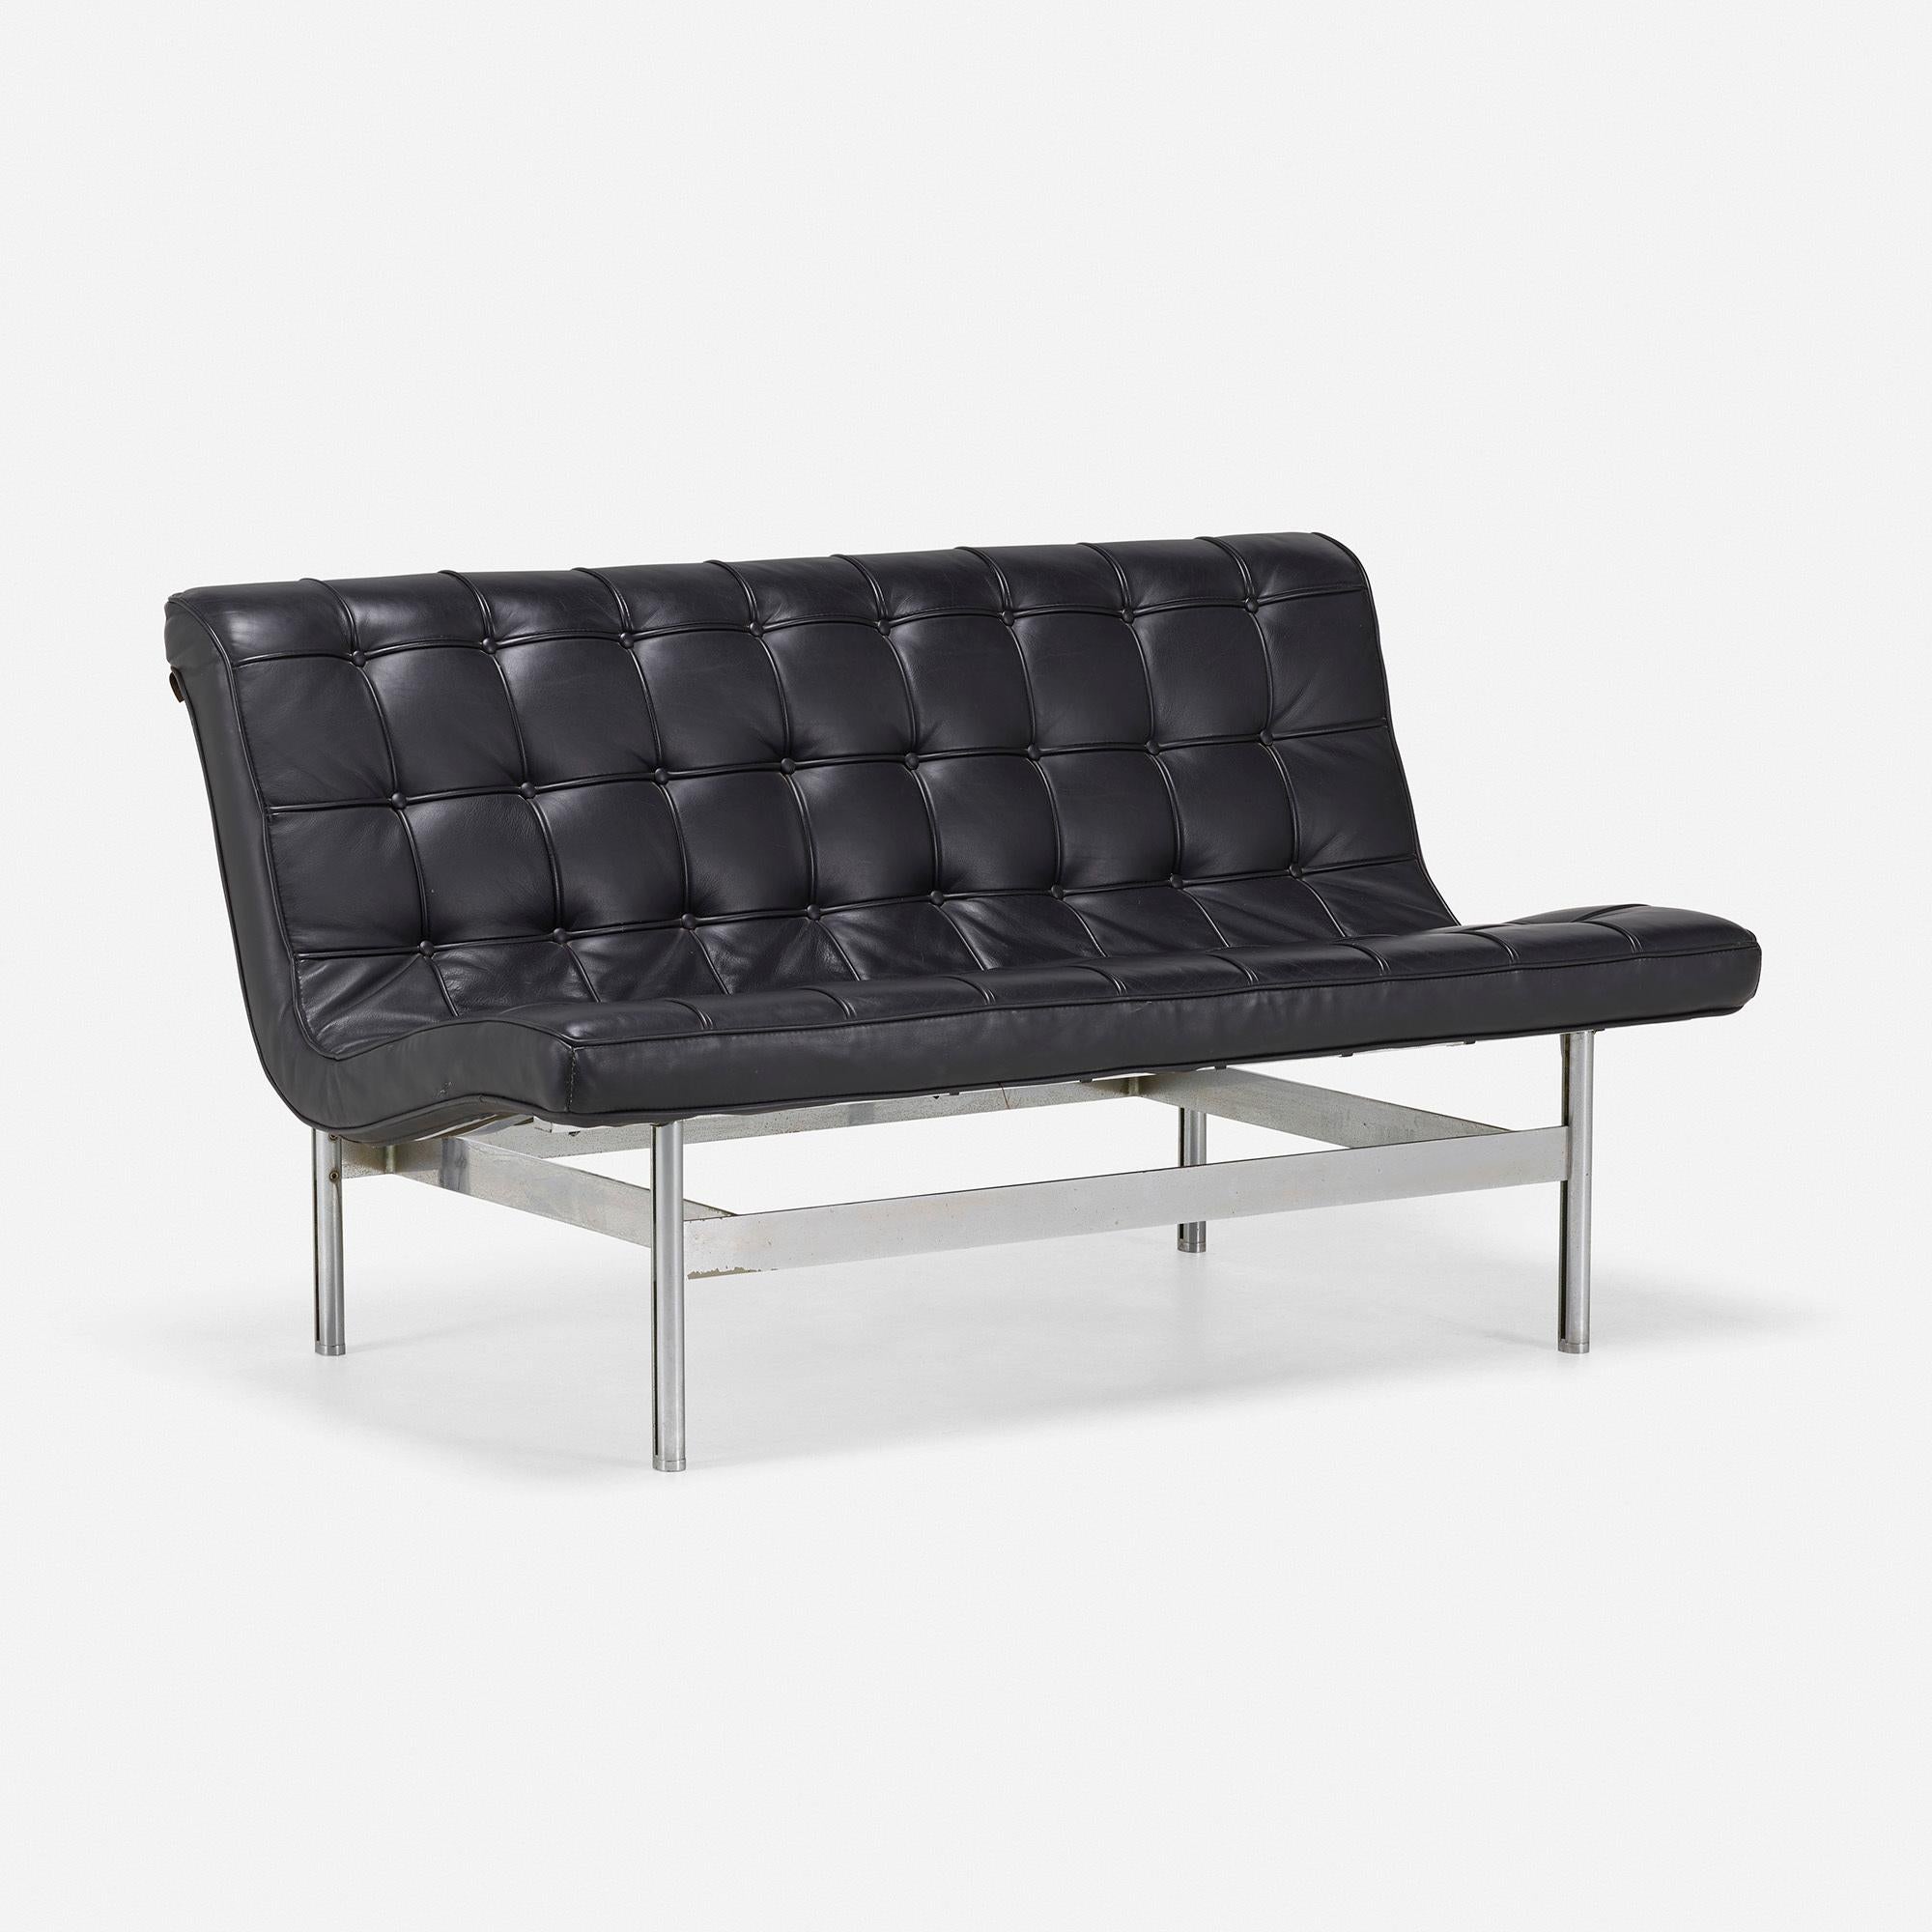 Kelley New York Settee by William Katavolos, circa 1965

Made by Laverne International, USA, 1952 / c. 1965

Additional information:
Material: Chrome-plated steel, leather
Size: 51 W × 28 D × 28 H Inches

Condition: Presents well with minor